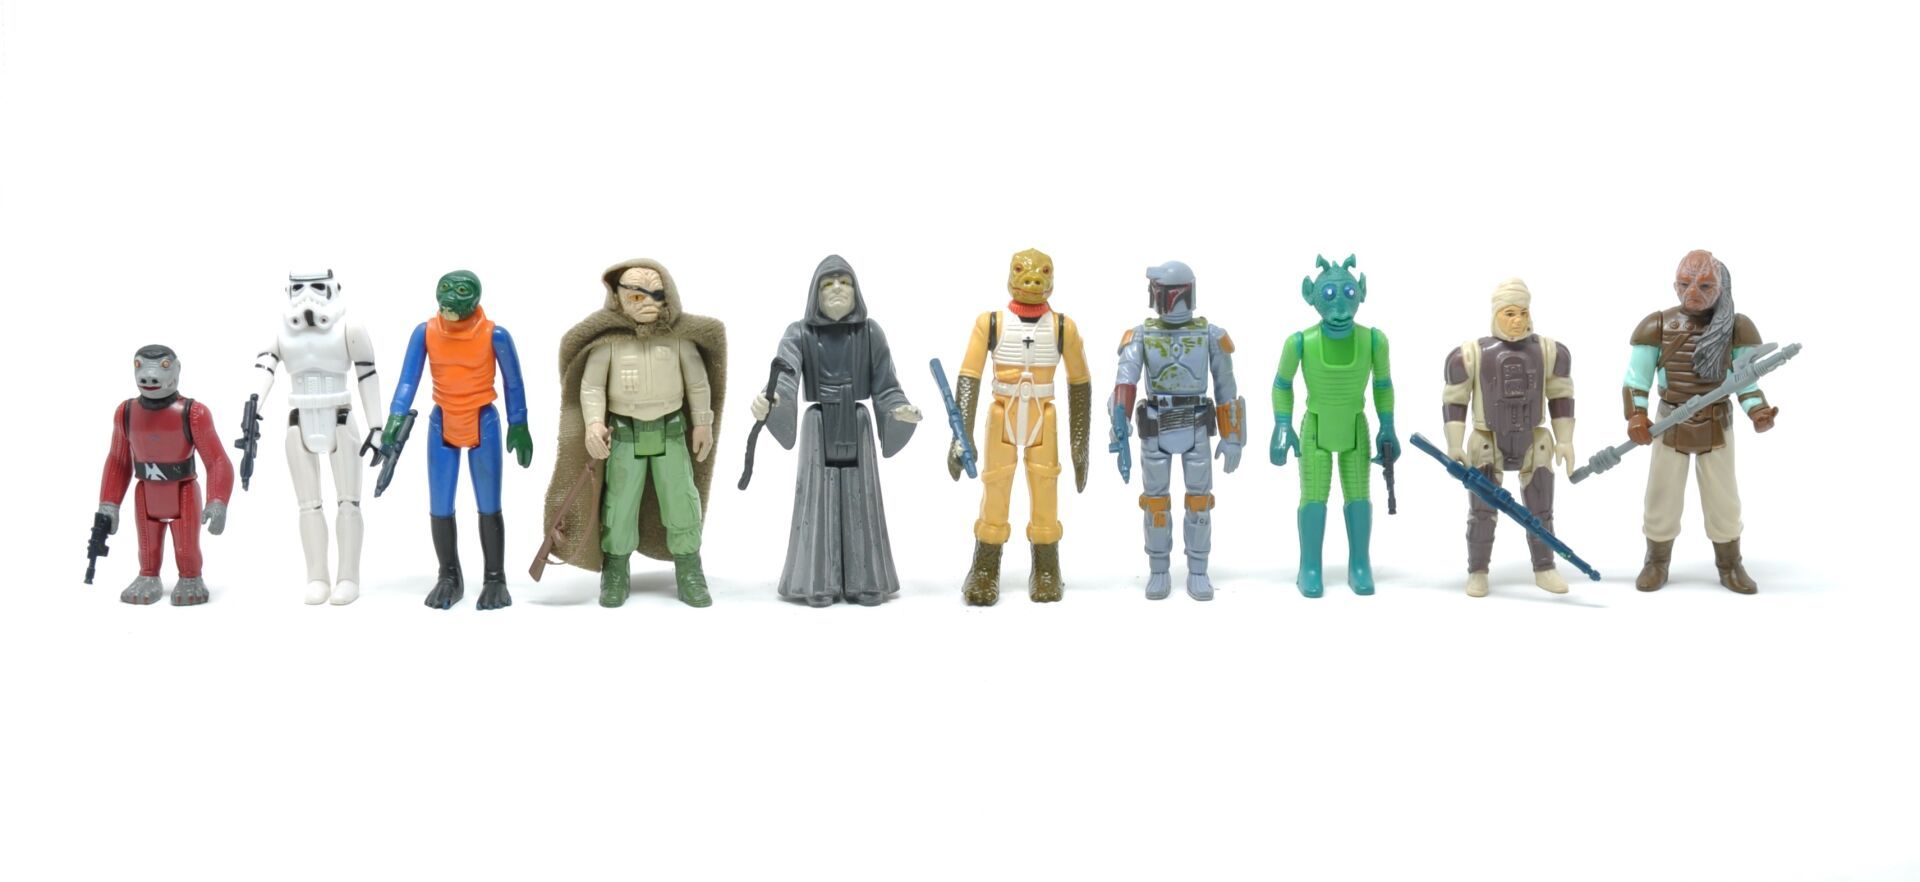 Null STAR WARS

Kenner, set of 10 complete figures with weapons

Snaggletooth

S&hellip;